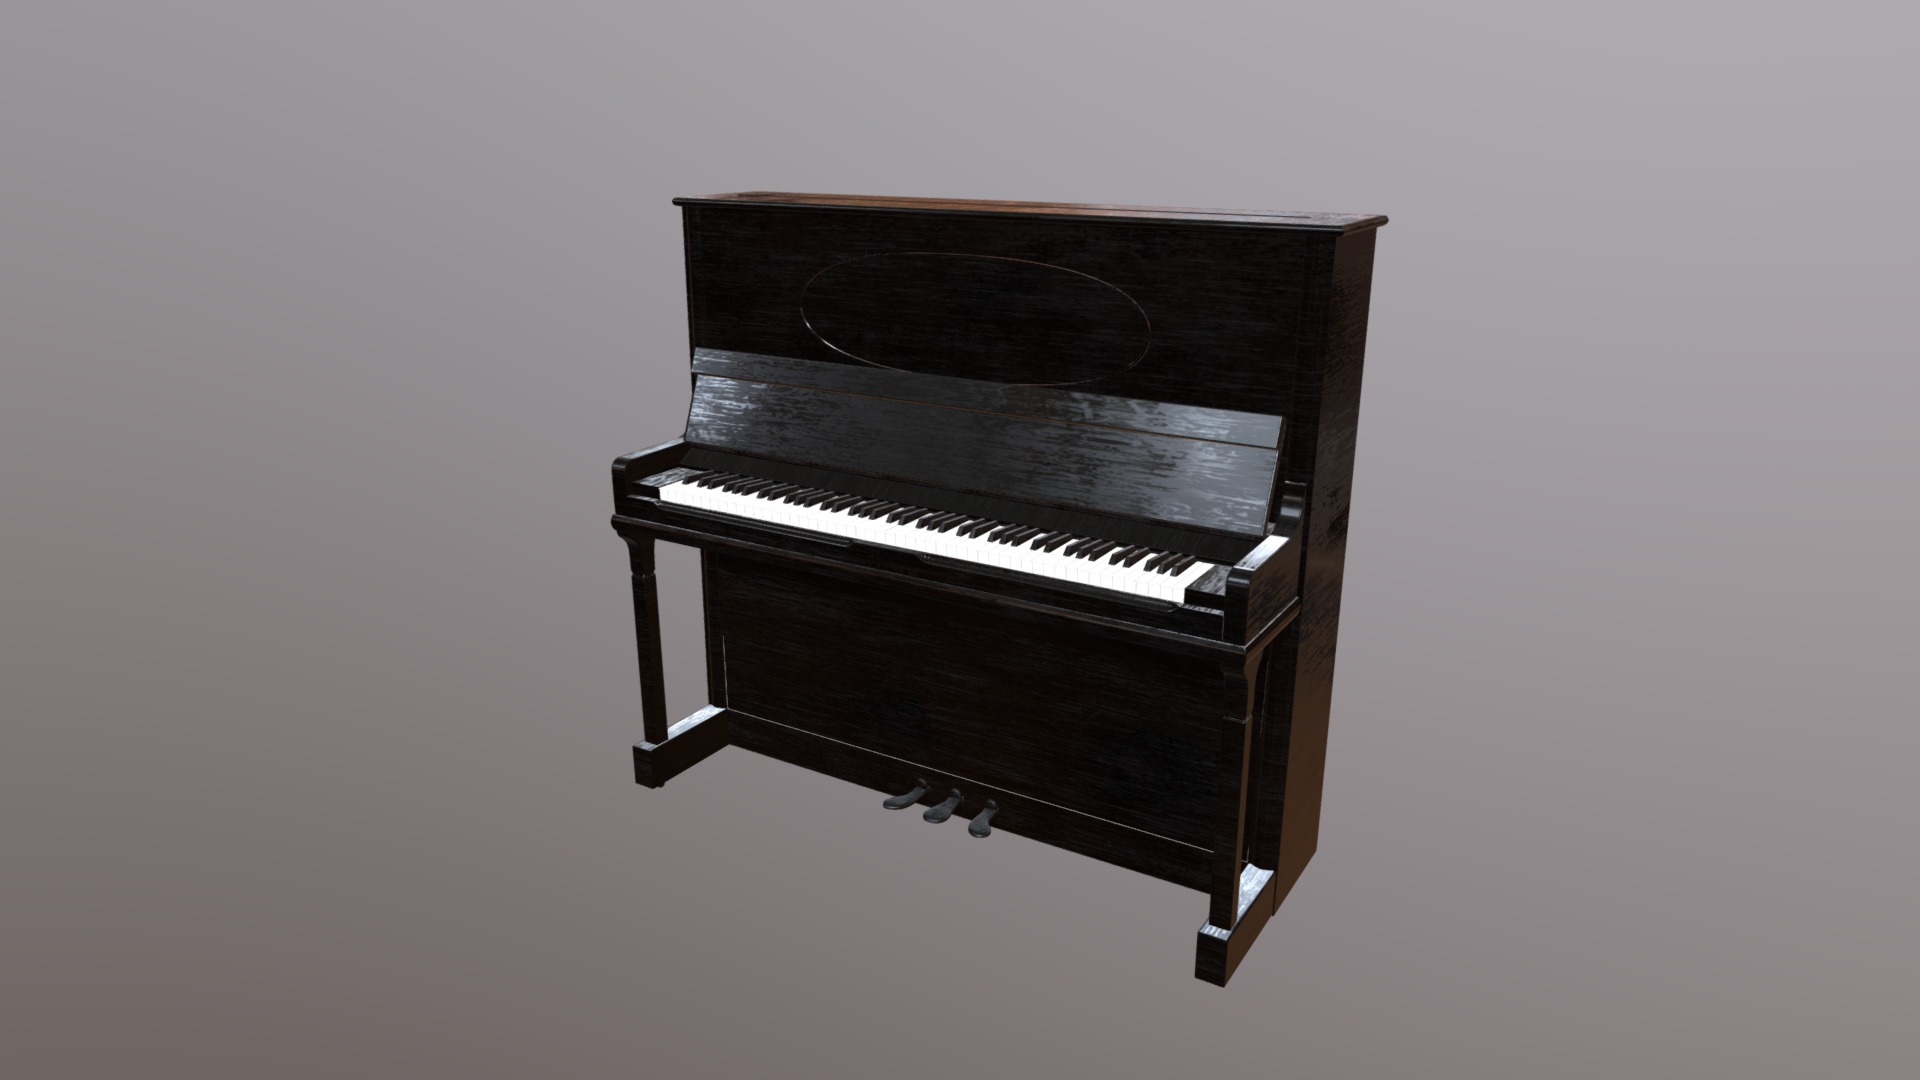 3D model Black piano - This is a 3D model of the Black piano. The 3D model is about a black and white piano.